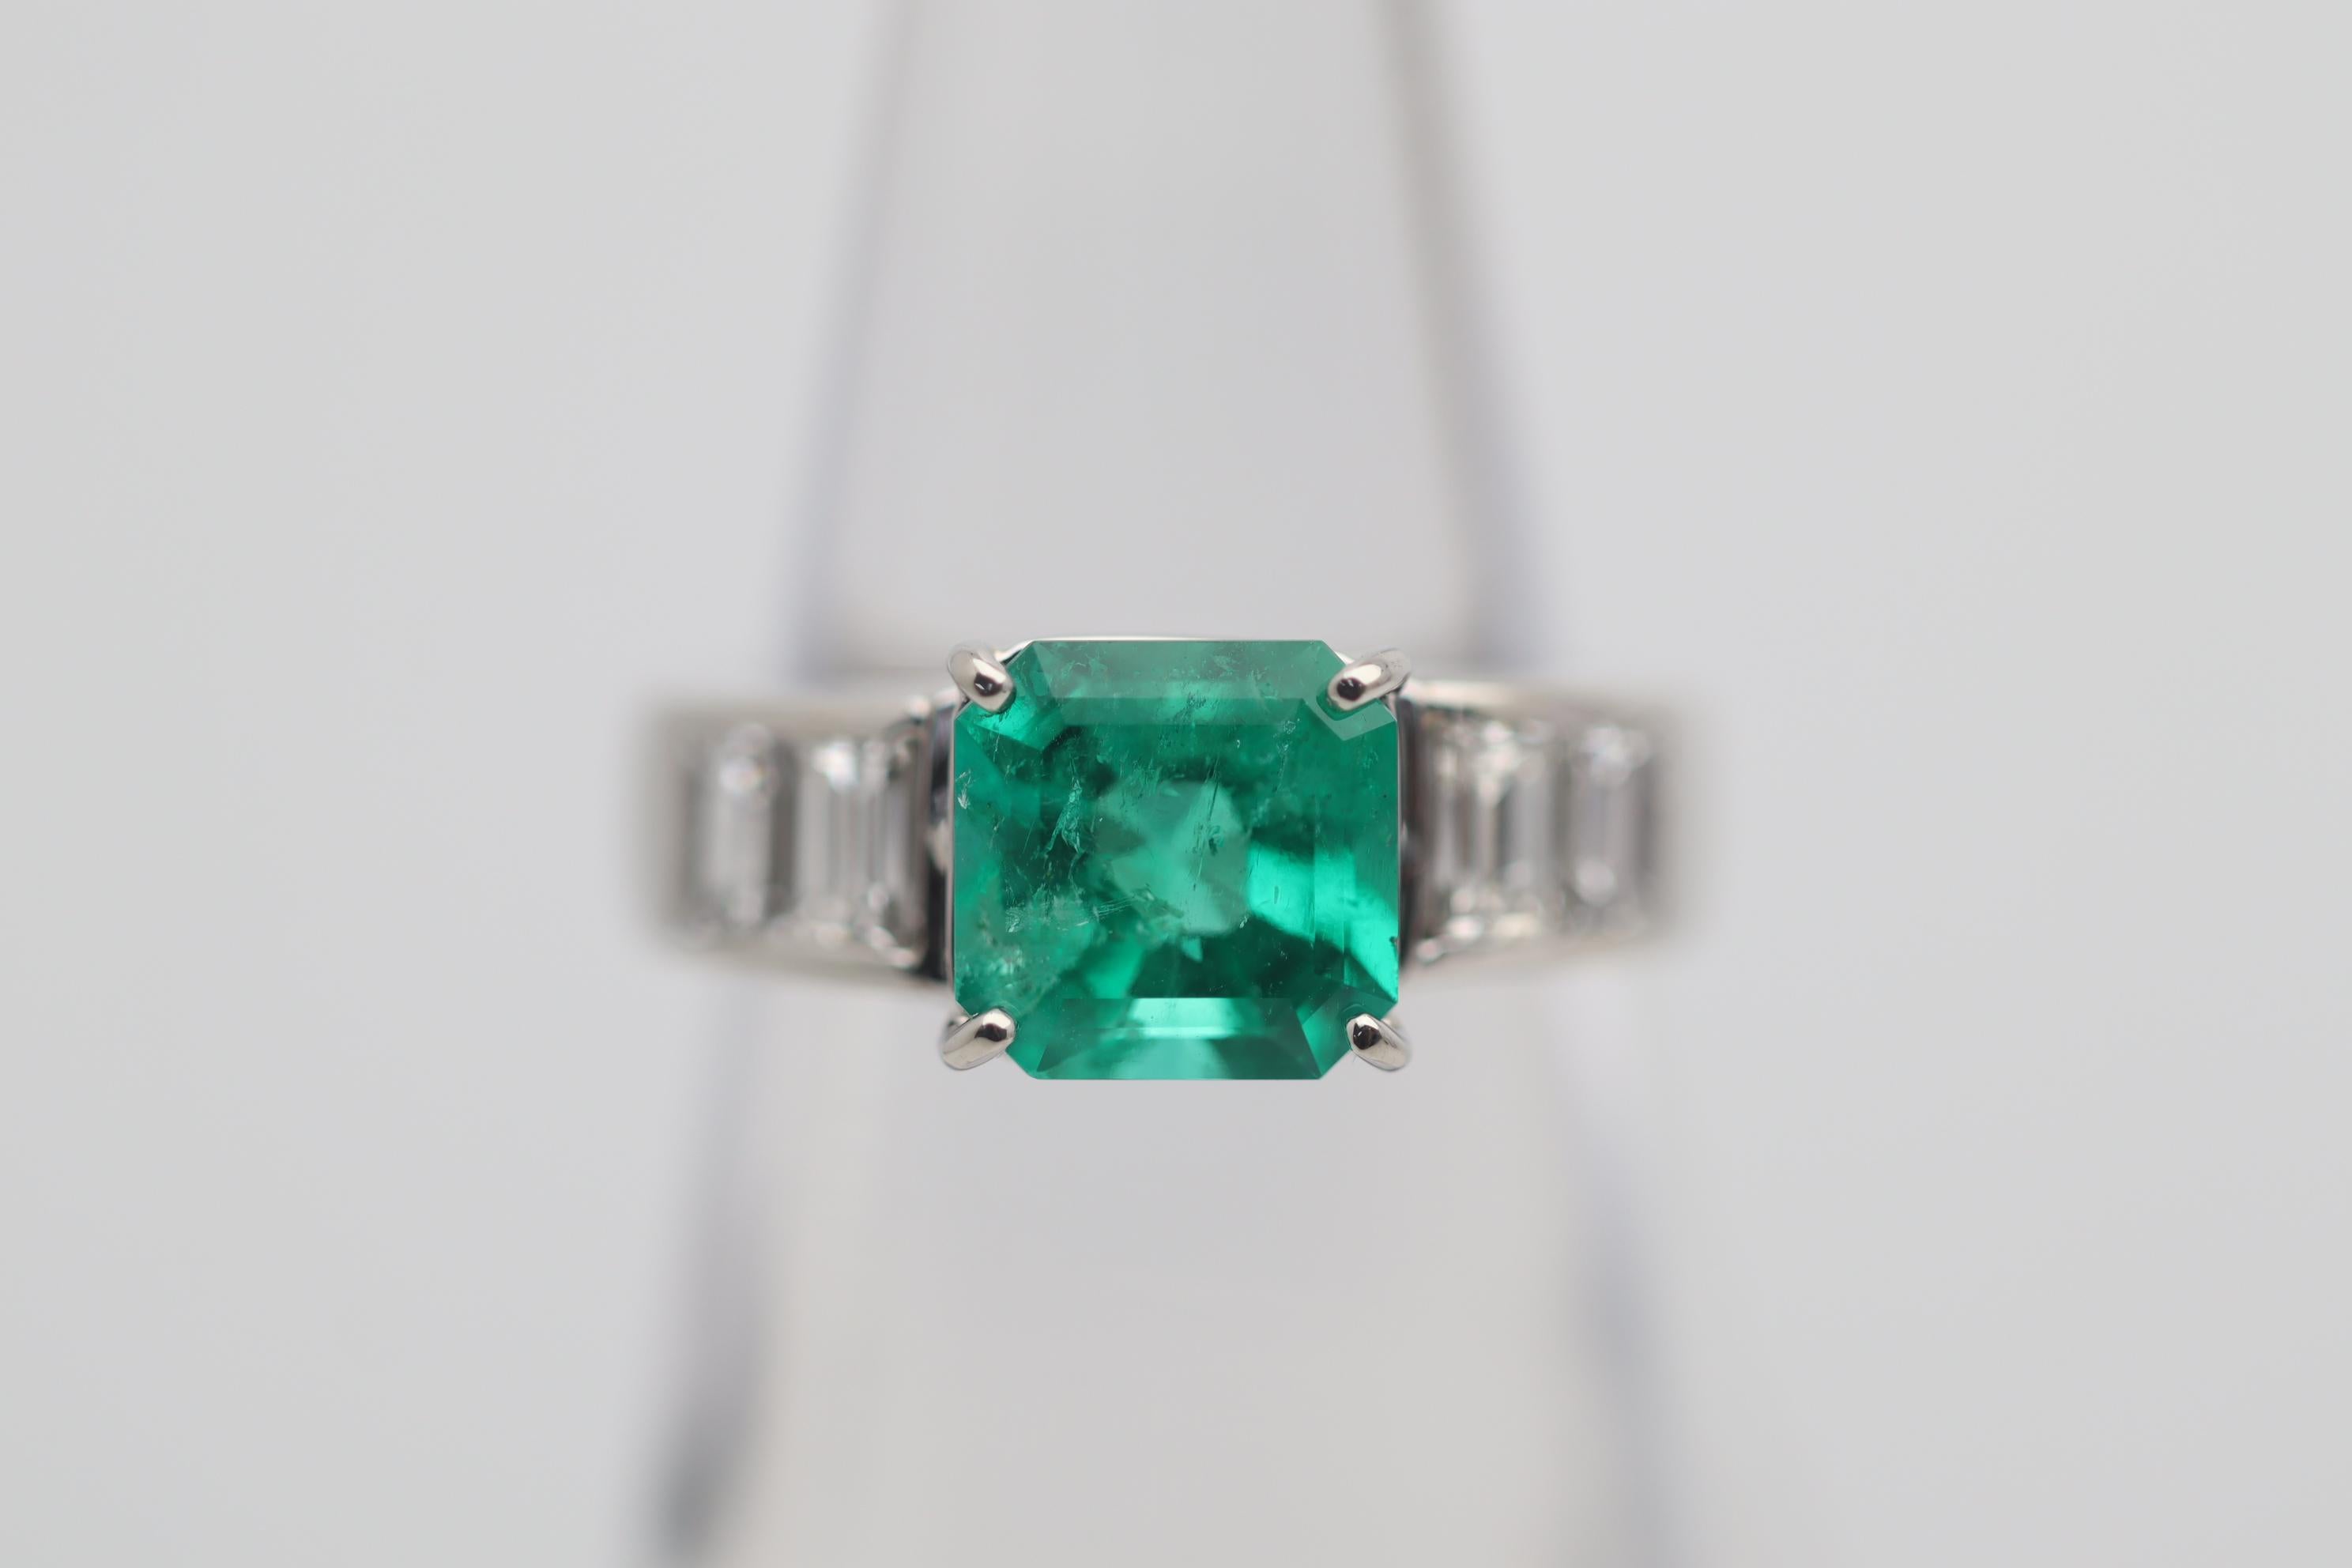 An elegant and chic platinum ring featuring a fine emerald weighing 2.12 carats. It has a rich and bright grass green color along with a traditional emerald-cut shape. It is accented by 4 large baguette-cut diamonds set on its sides and weighing a